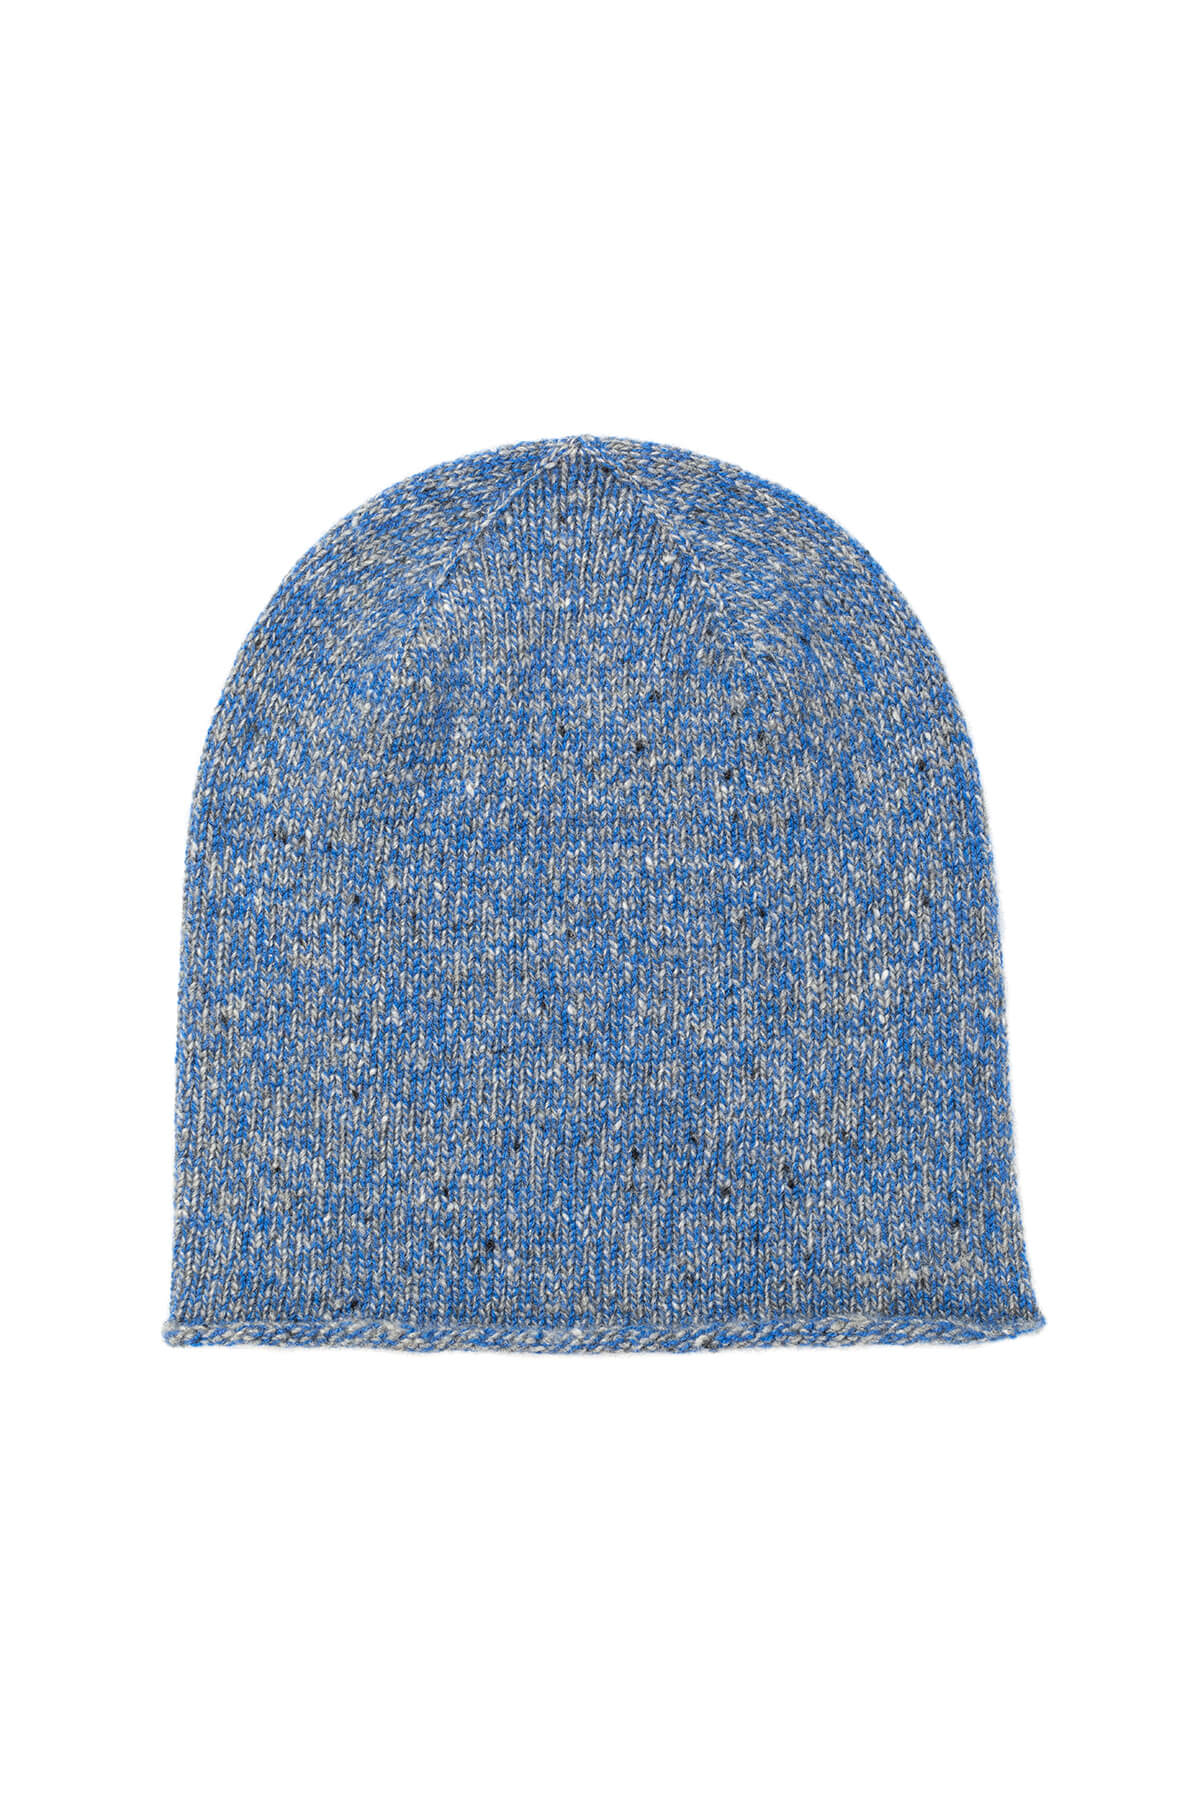 Johnstons of Elgin’s Orkney Blue Light Grey Cashmere Donegal Marl Beanie on a white background HAY03303004528